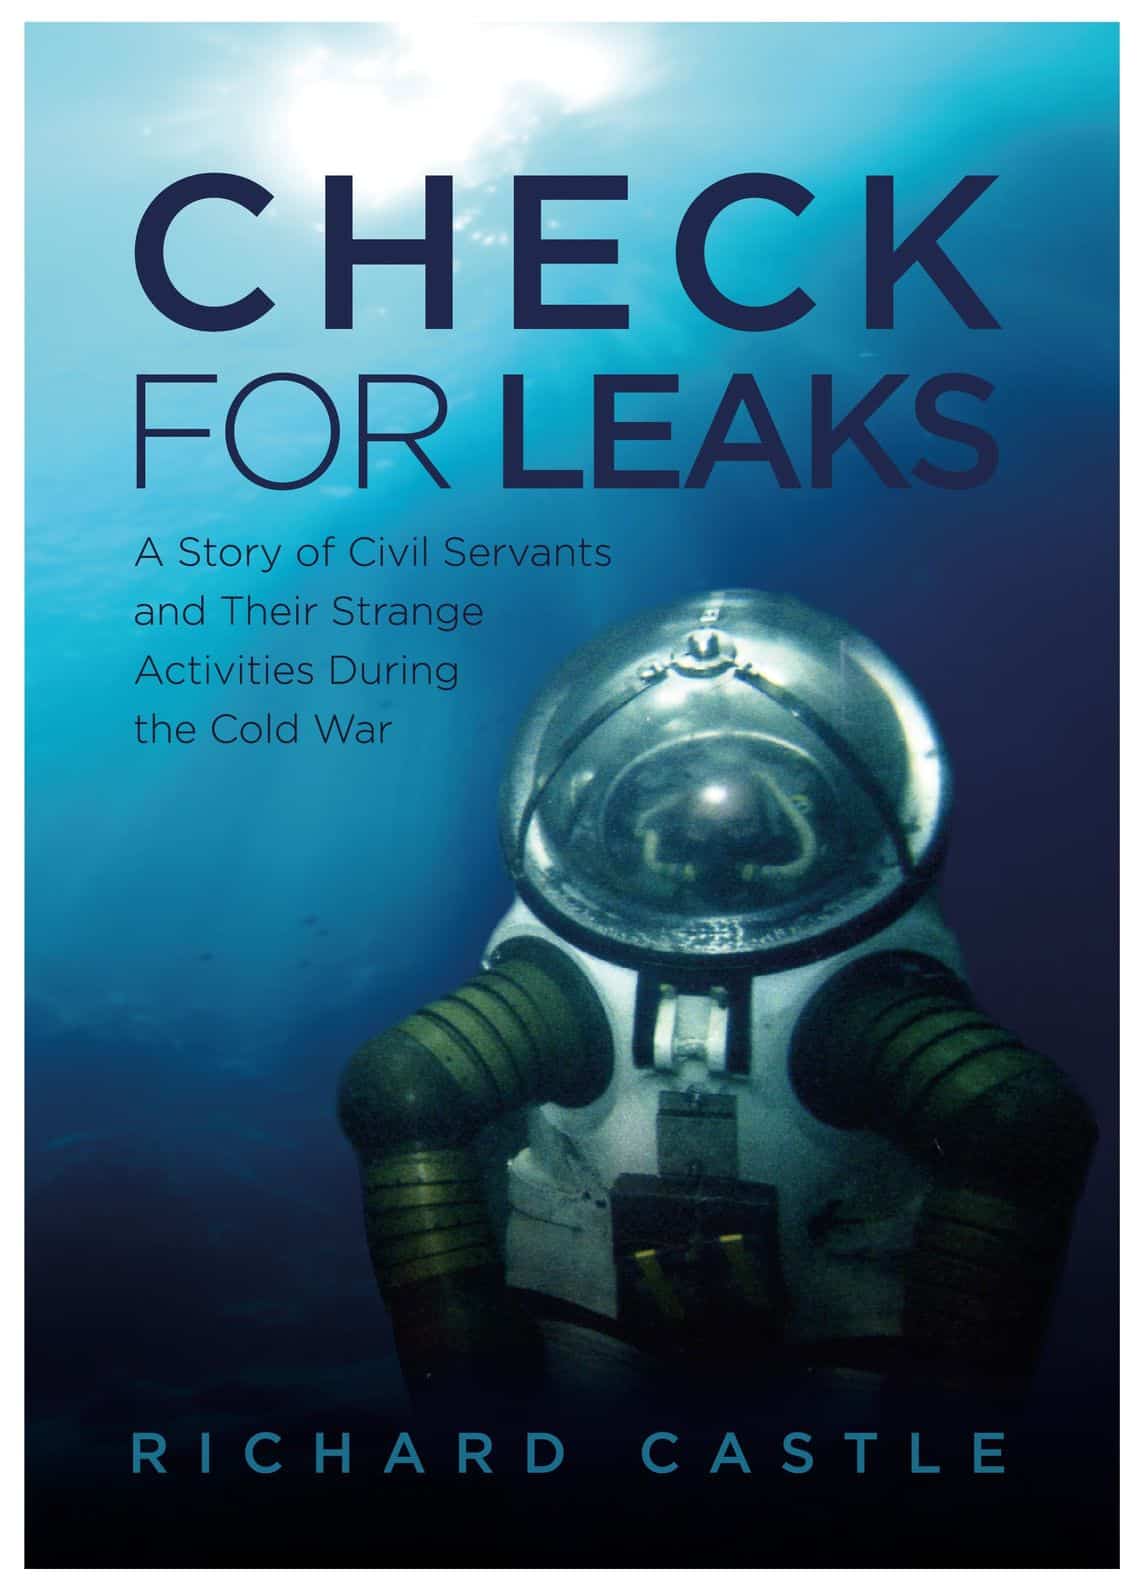 Book release: 'Check for Leaks' by Richard Castle